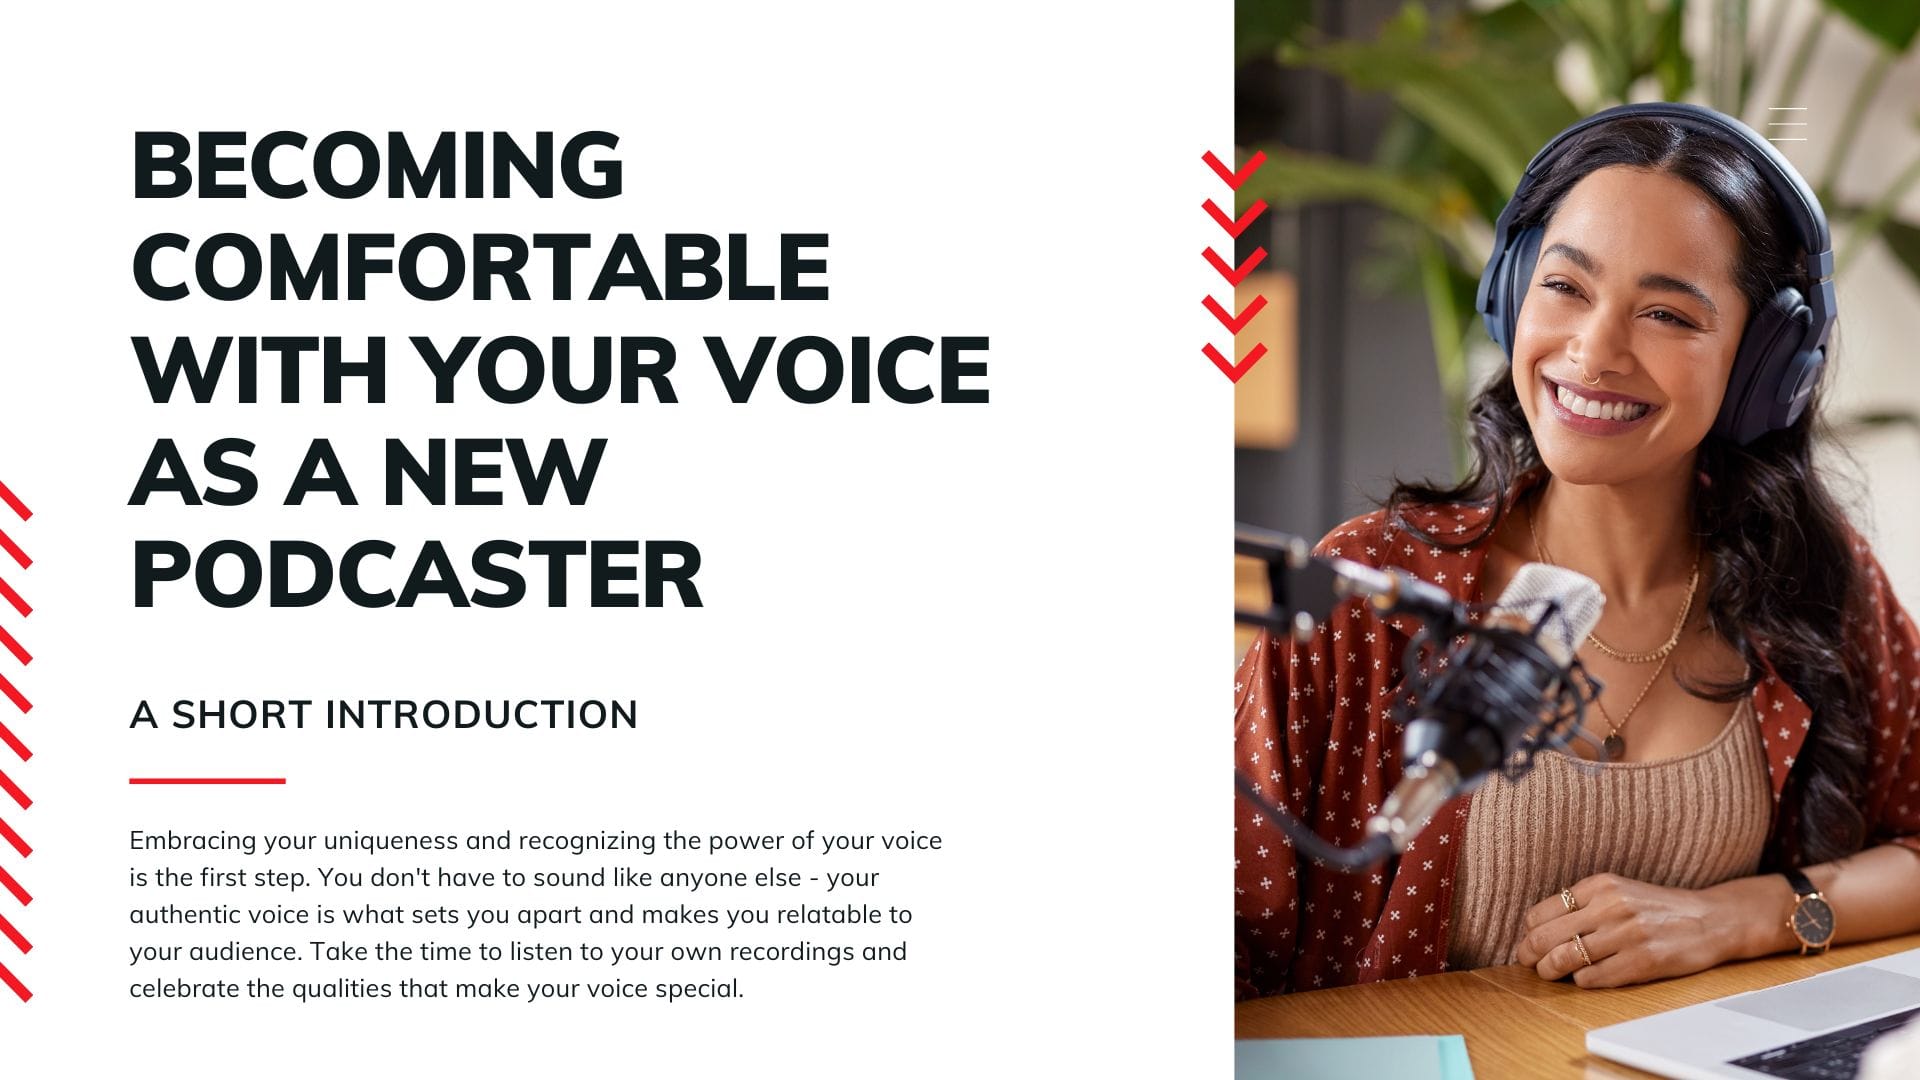 Becoming Comfortable with Your Voice as a New Podcaster